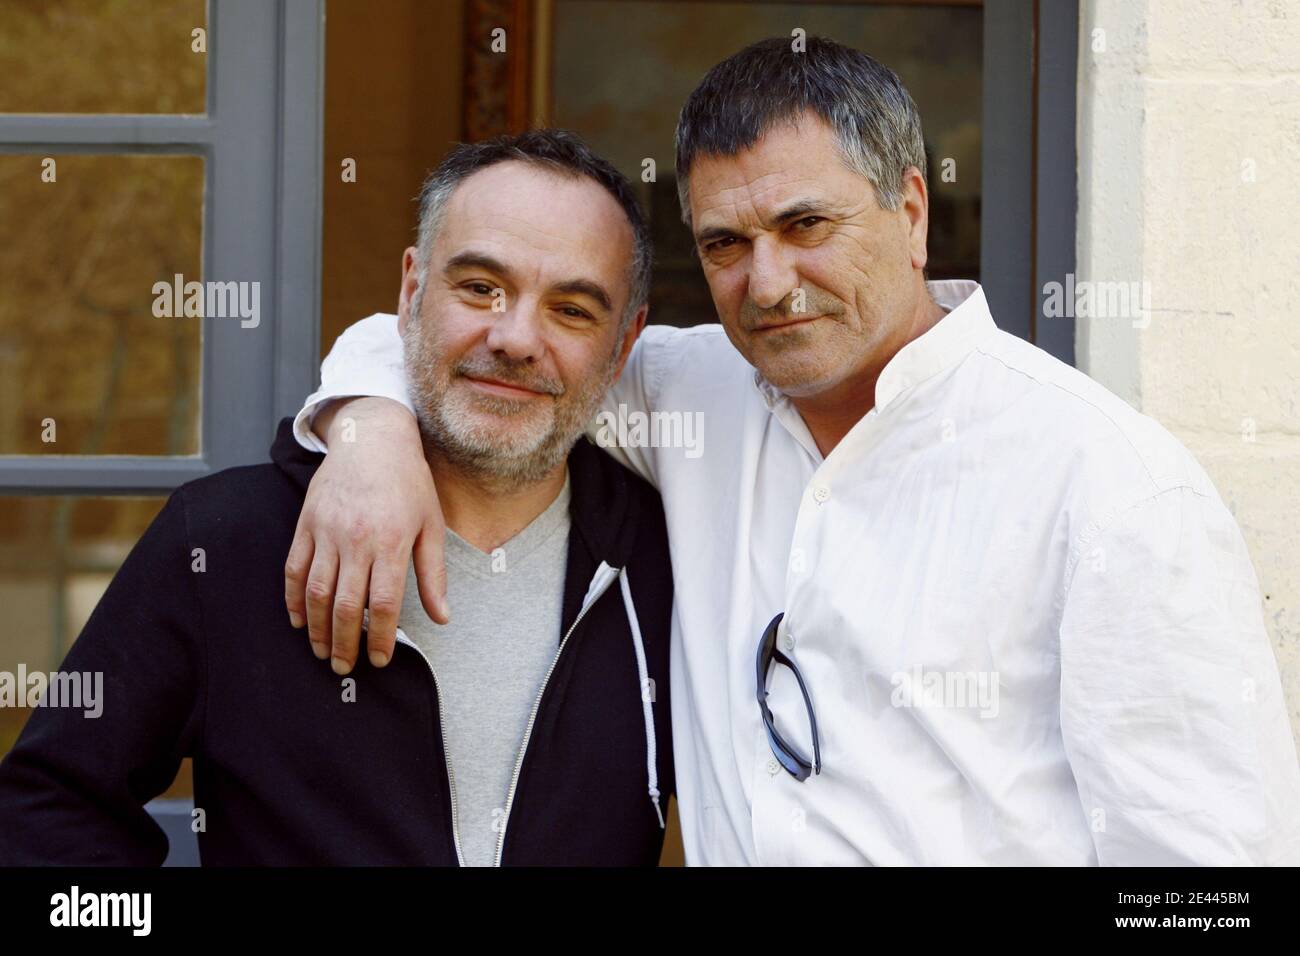 Director Roger Delattre and Jean-Marie Bigard attend the premiere of 'Le Missionnaire' in Lille, France on April 21, 2009. Photo by Mikael LIbert/ABACAPRESS.COM Stock Photo